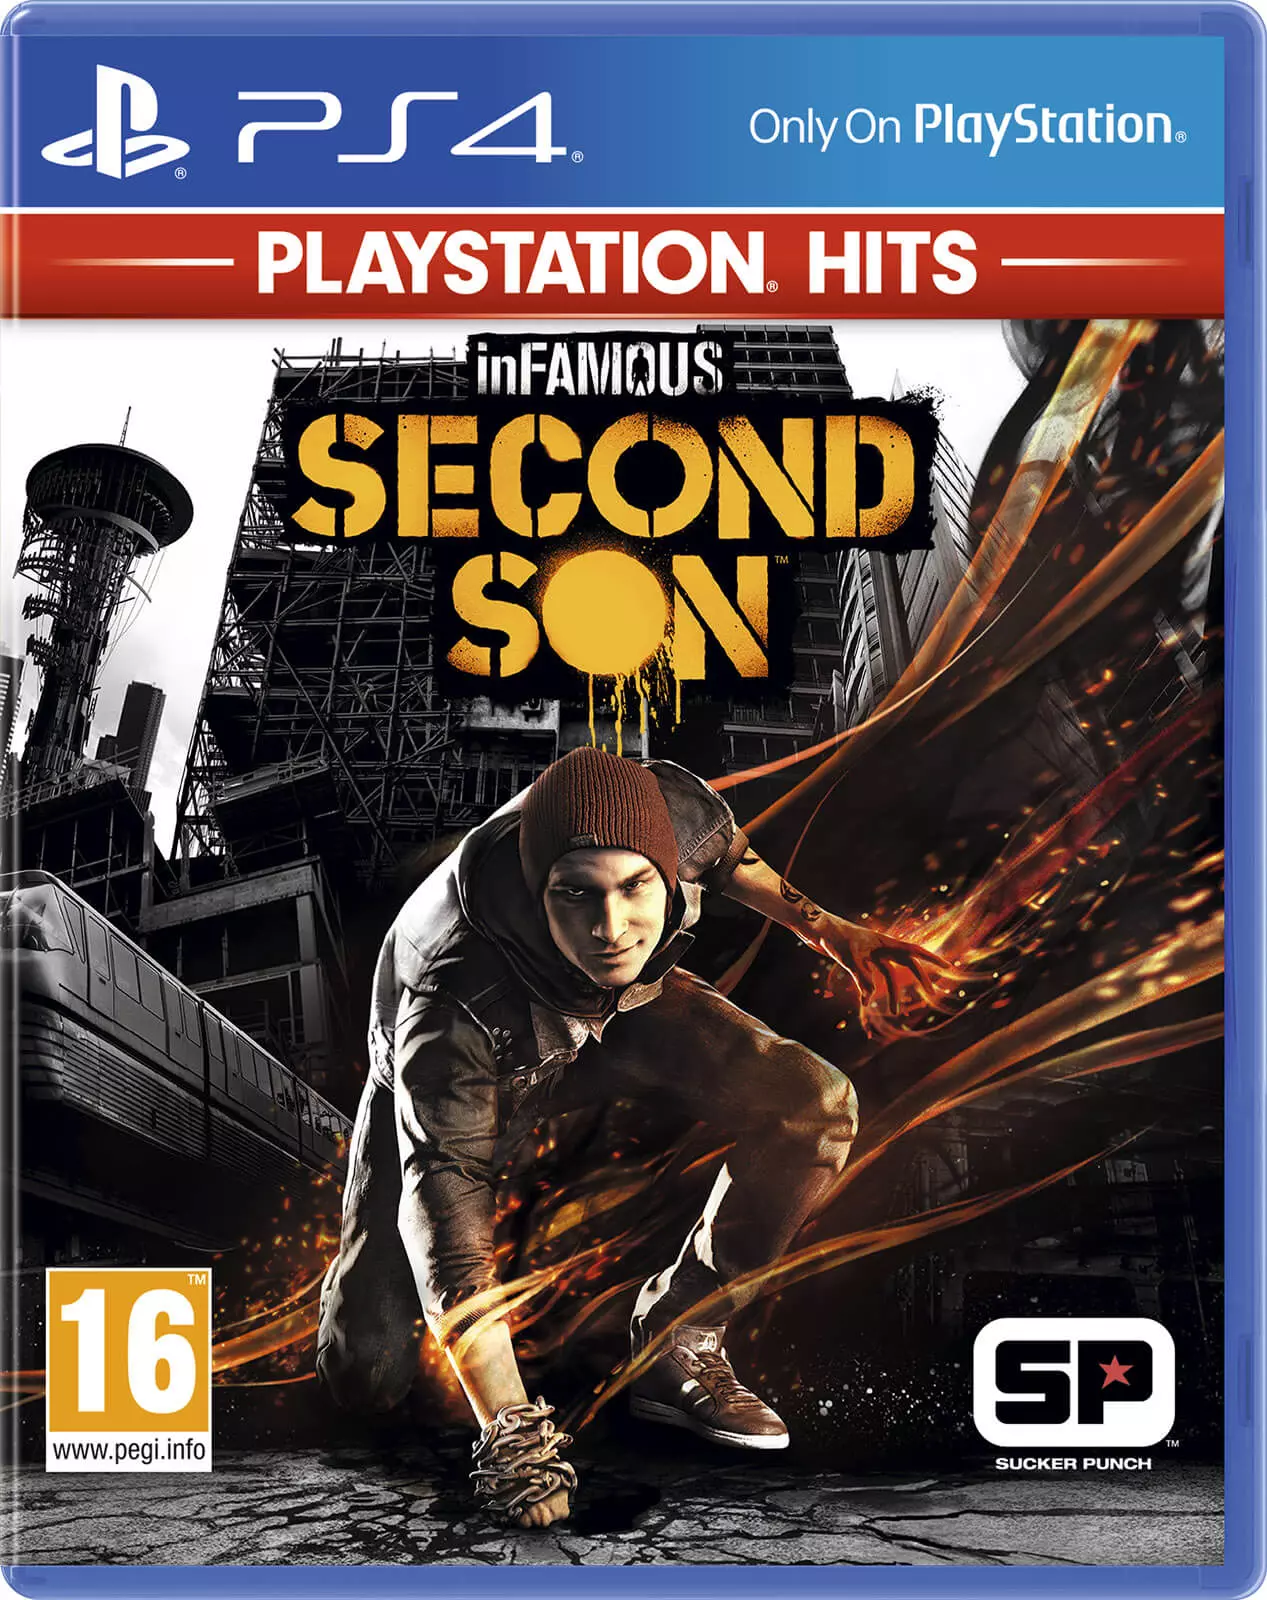 Infamous: Second Son Playstation Hits